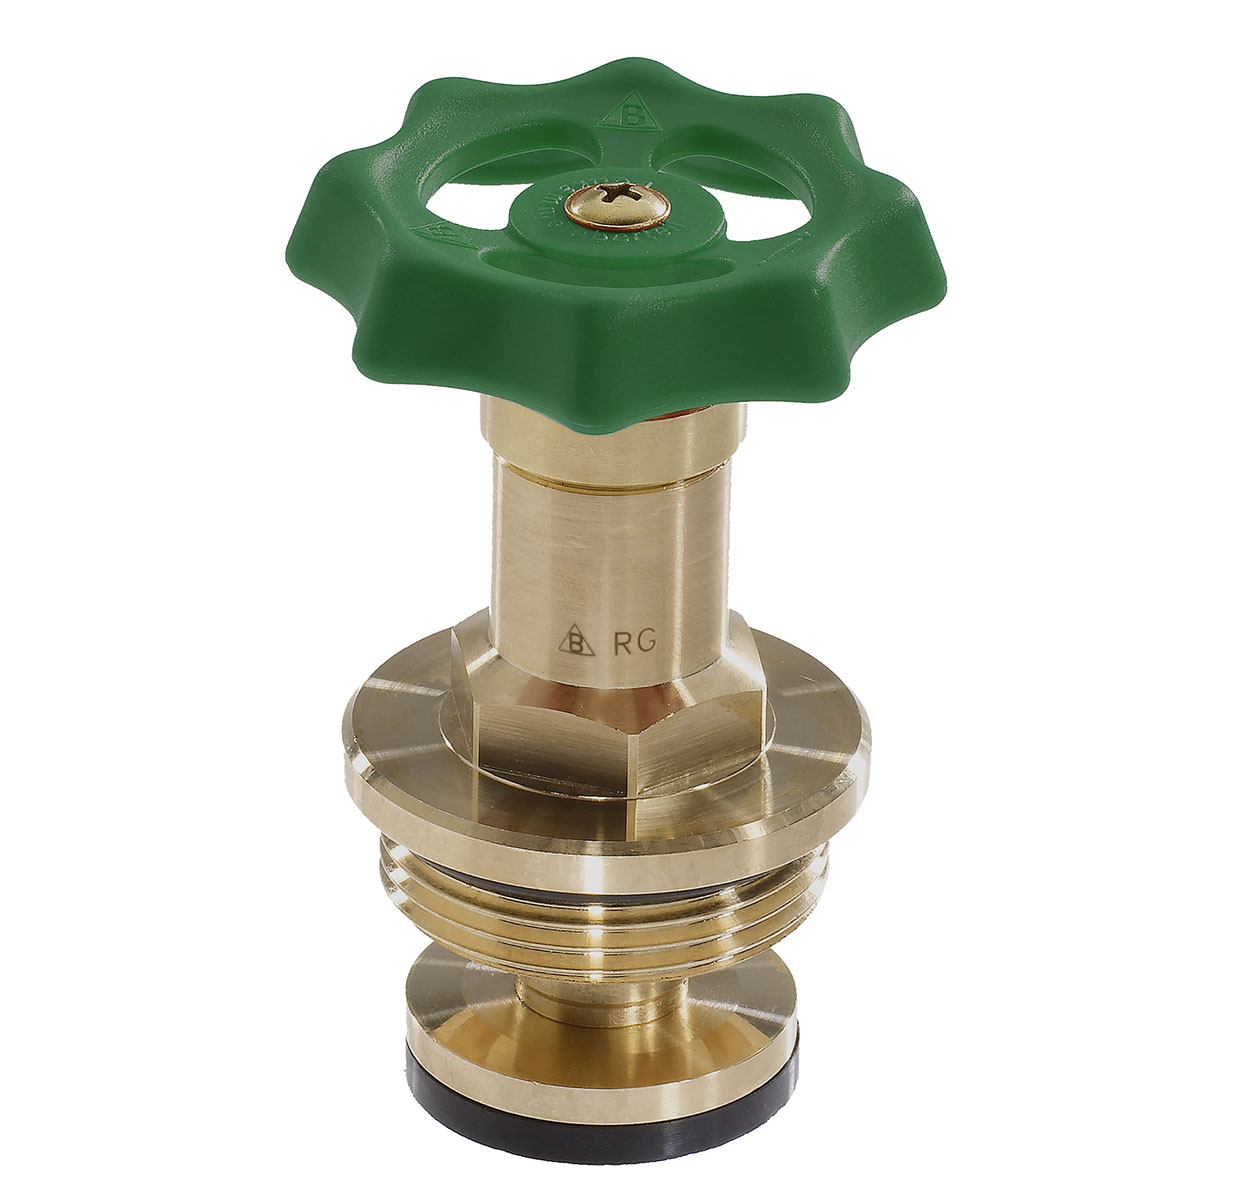 1274400 - Cuphin Upper-part with grease chamber SOFT-drive-system, for free-flow valves, non-rising spindle